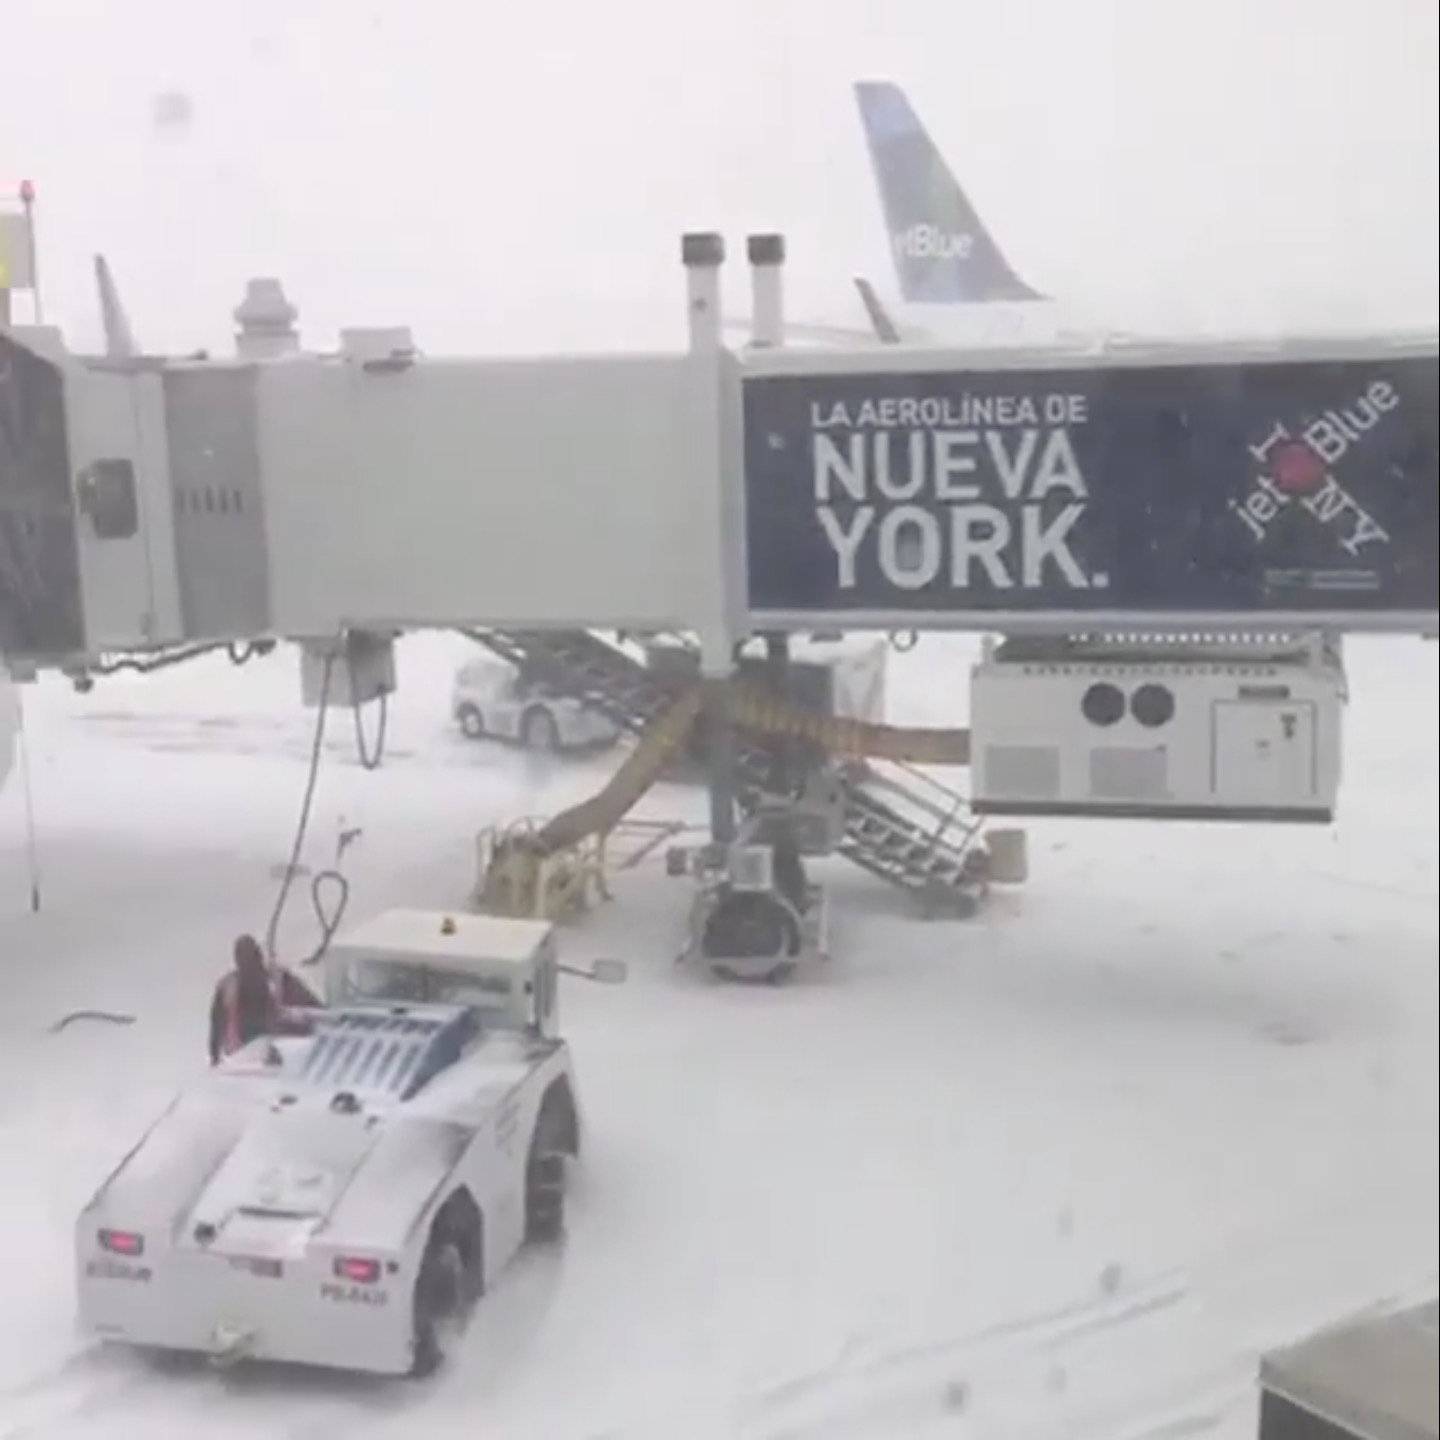 Staff work on the John F. Kennedy International Airport apron during a snow storm, in Queens, New York